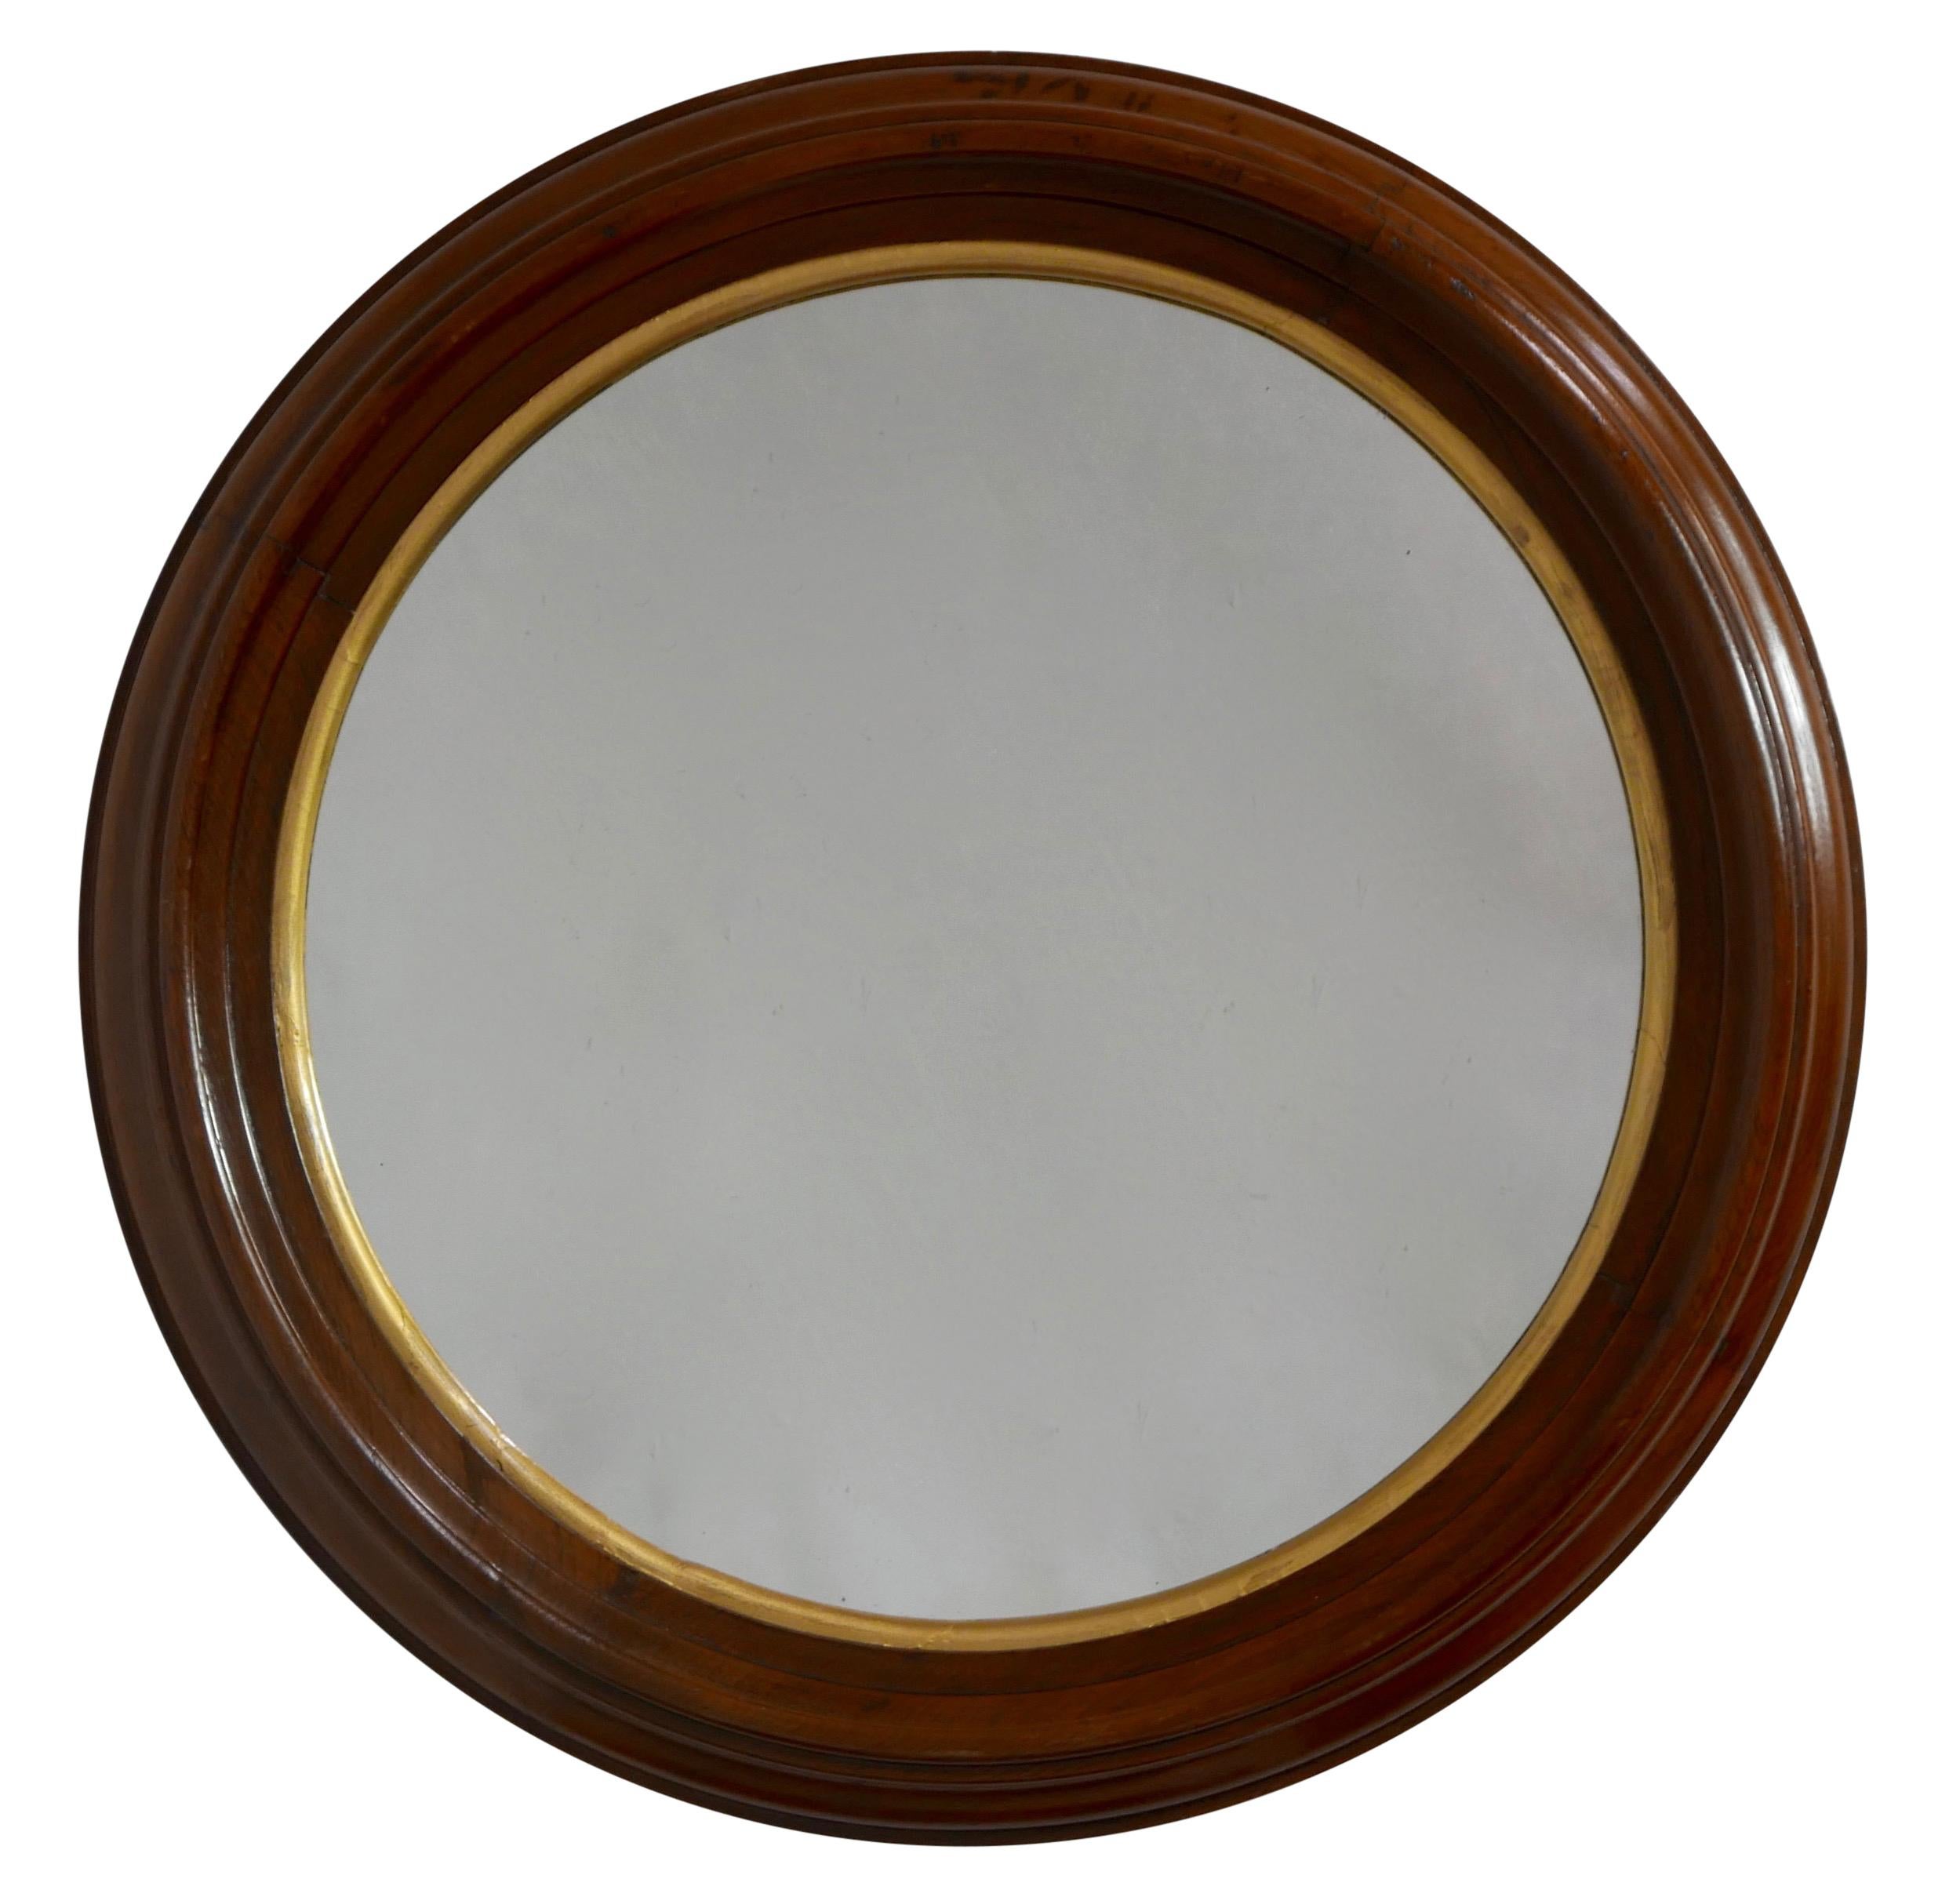 Circular walnut and parcel-gilt framed mirror, mortise and tenon construction of the multi carved walnut framed with an inner gilt band around the mirror plate. American, circa 1870.
  